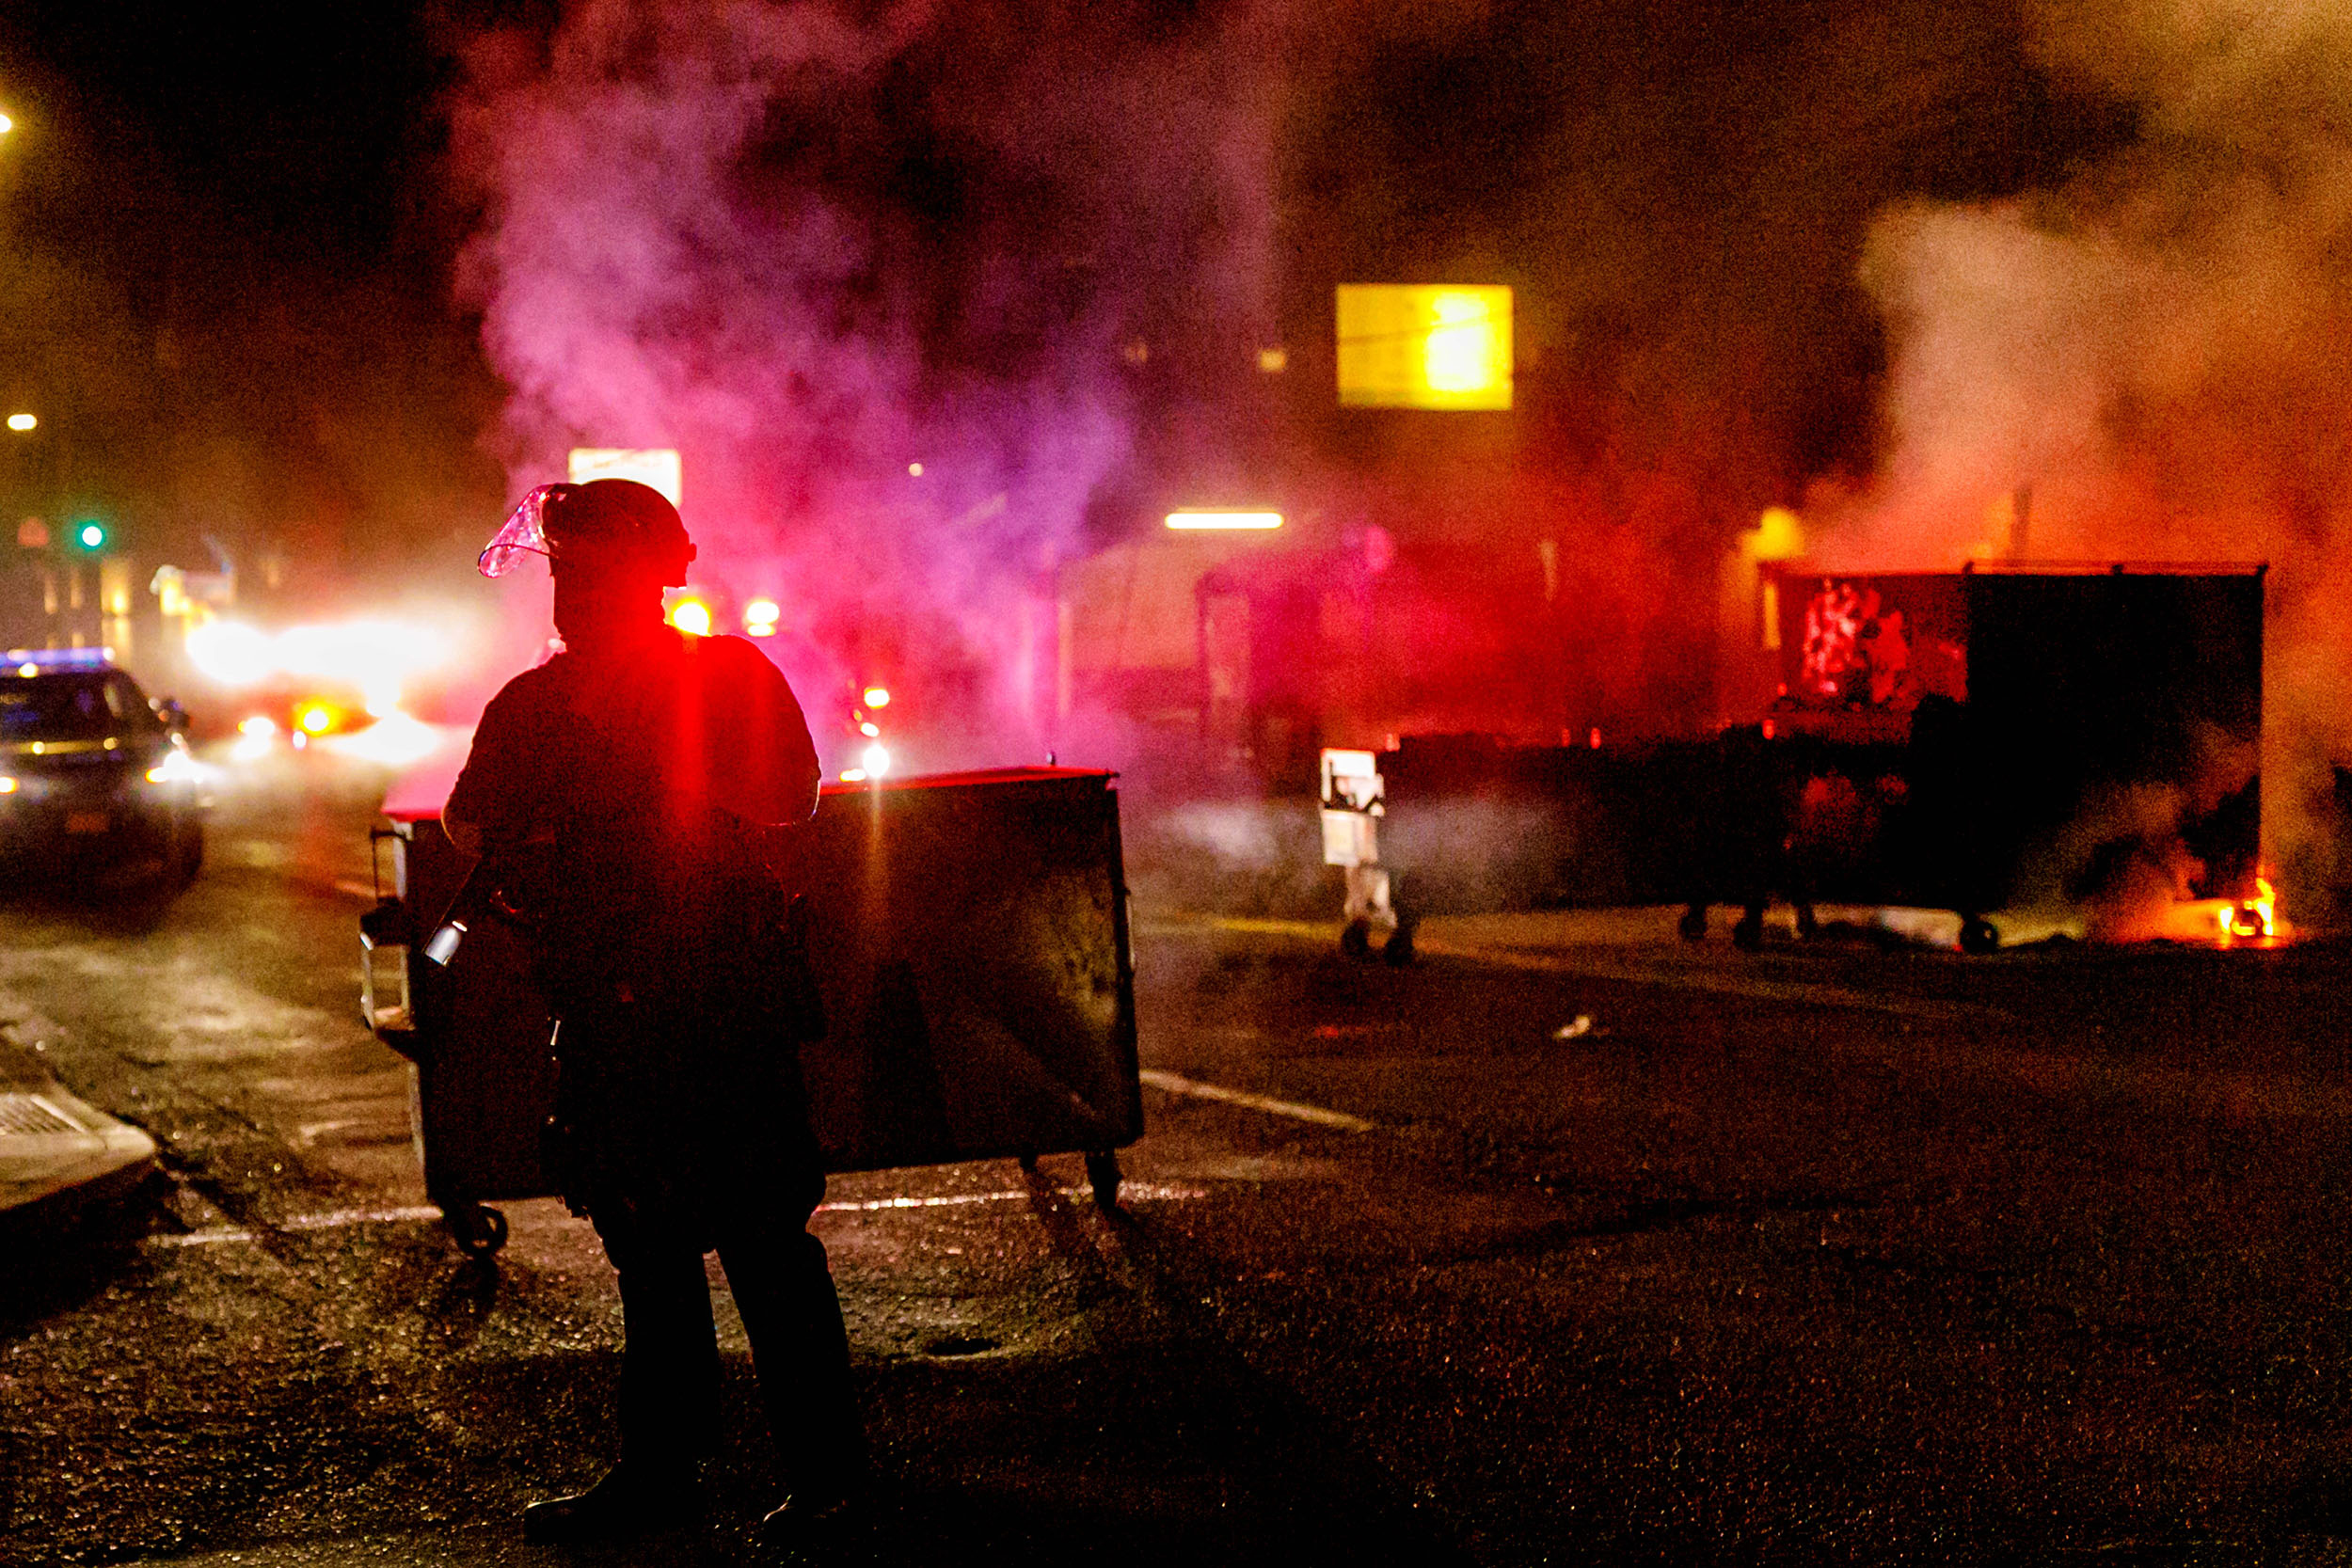 People protesting police brutality spray graffiti and start fires at the Portland Police Union building on Friday.